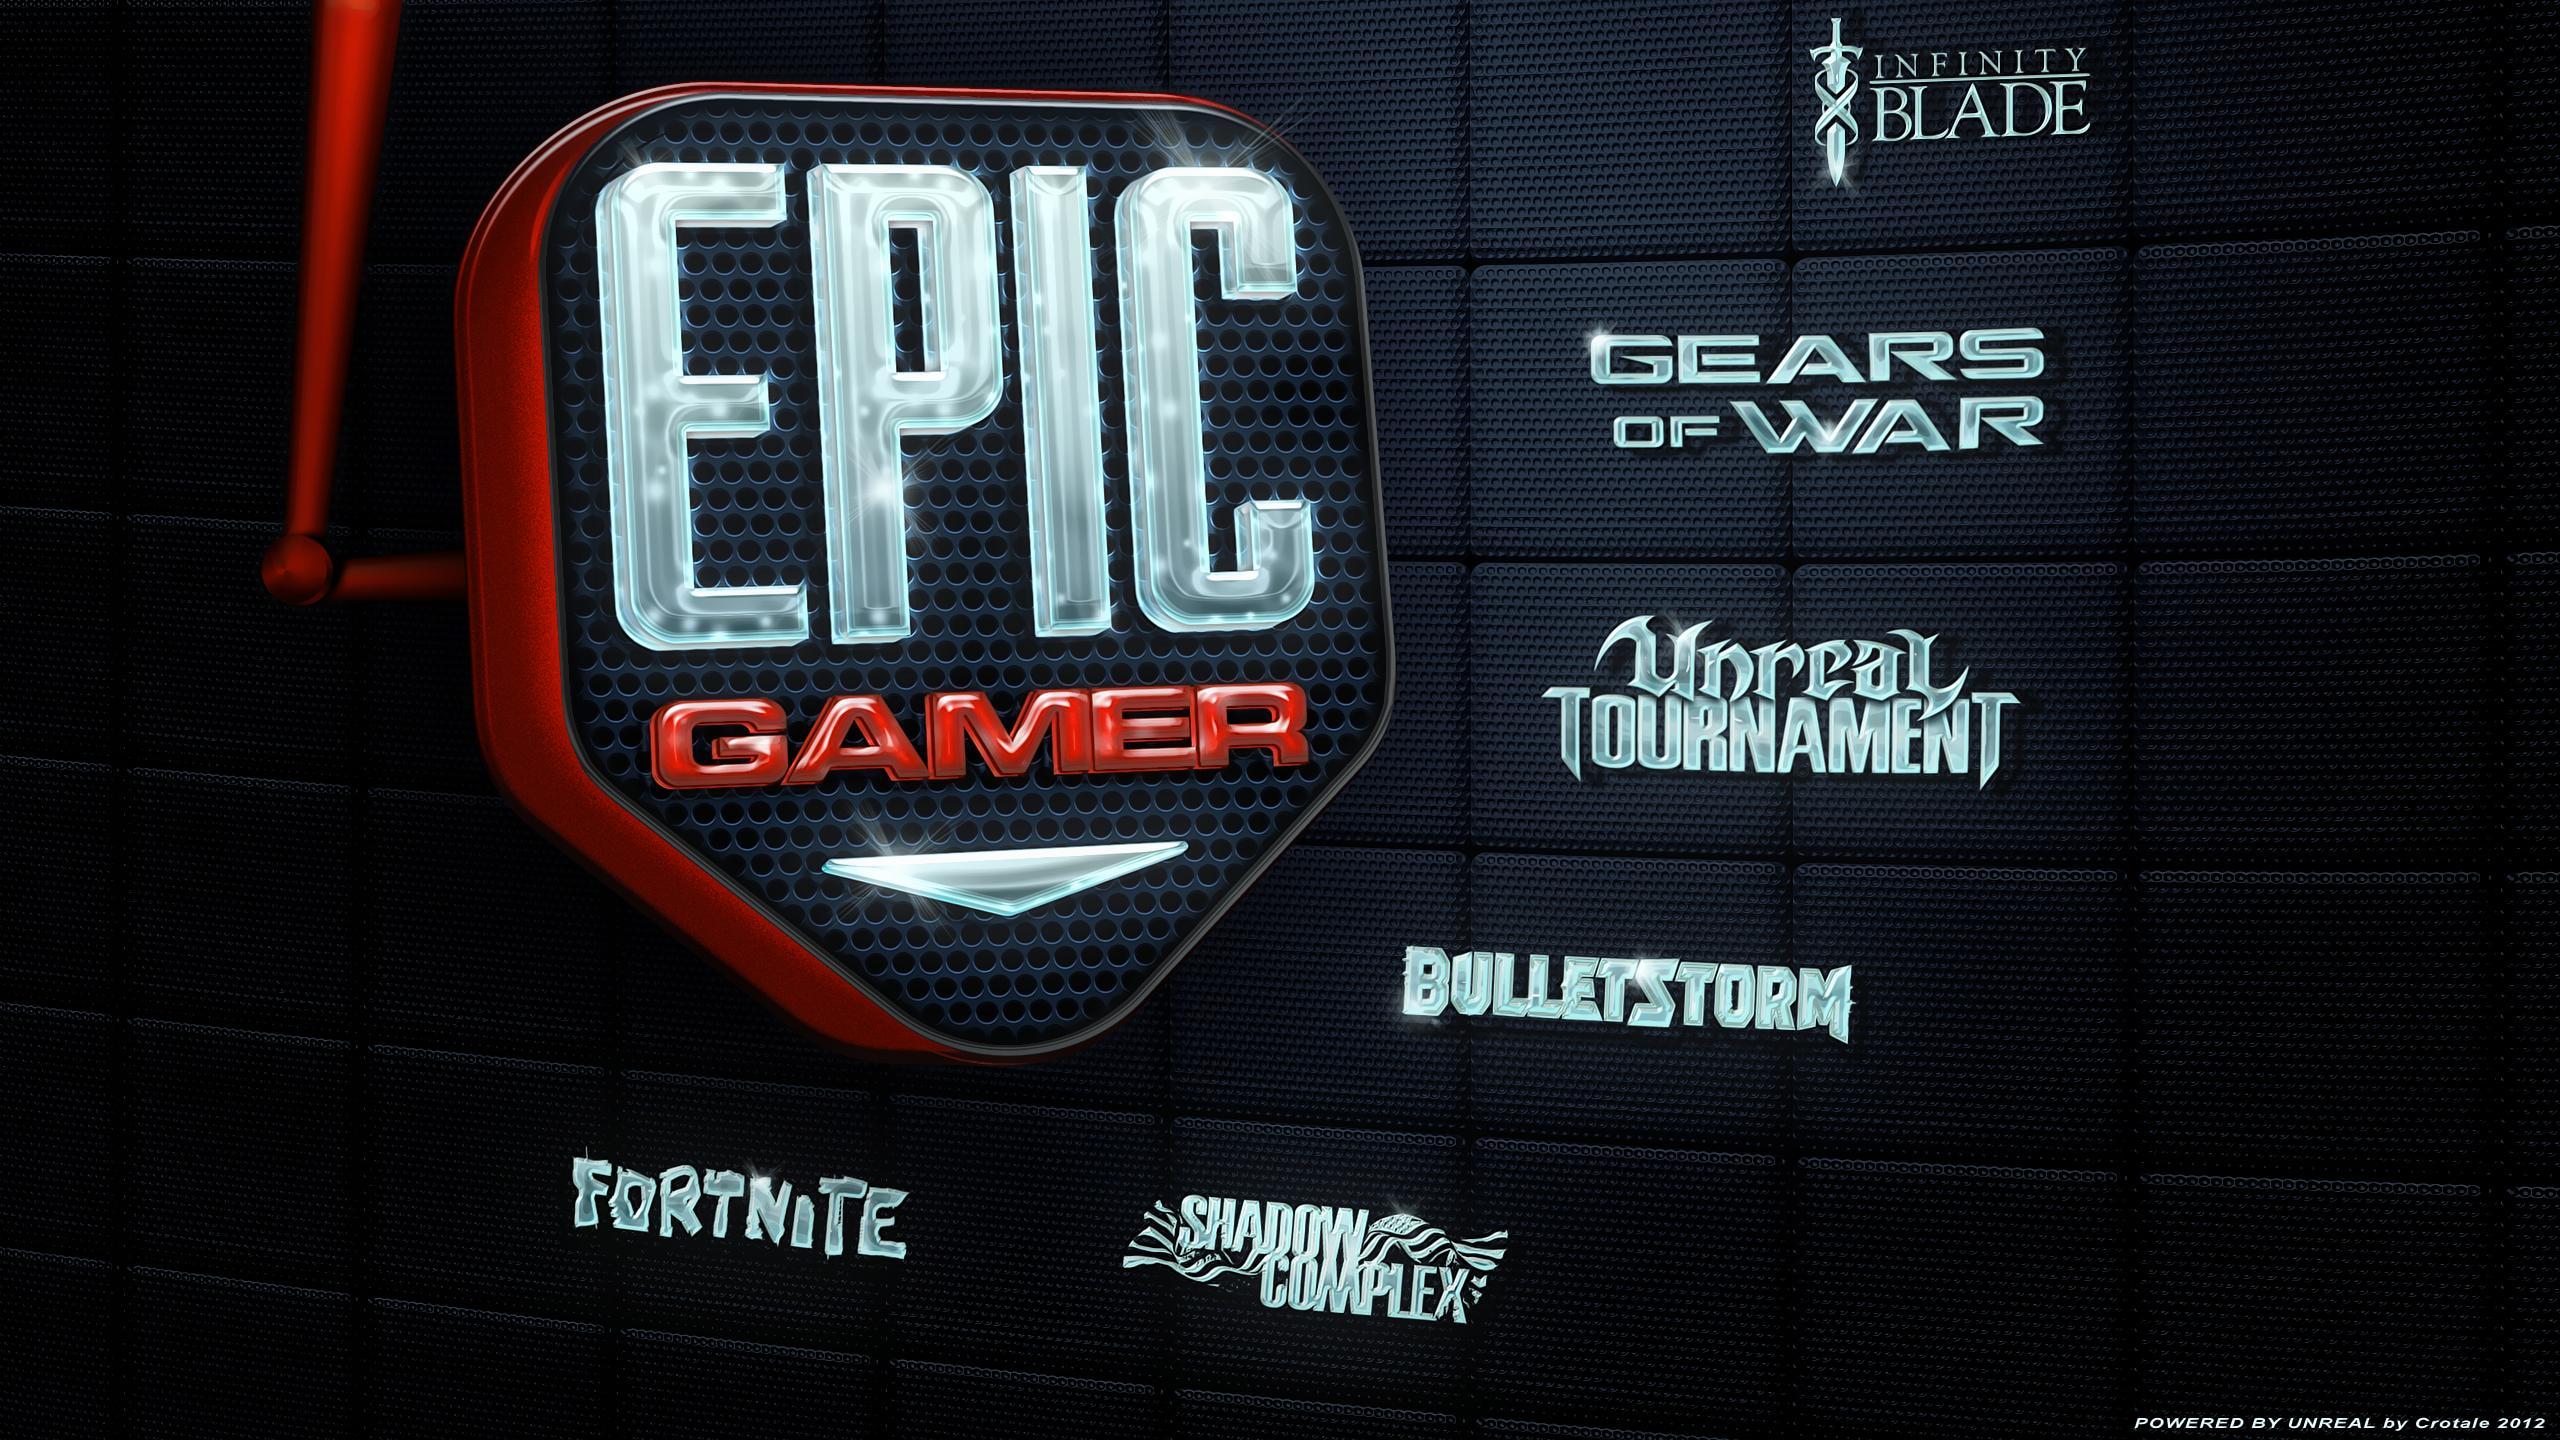 10 Epic Games HD Wallpapers and Backgrounds